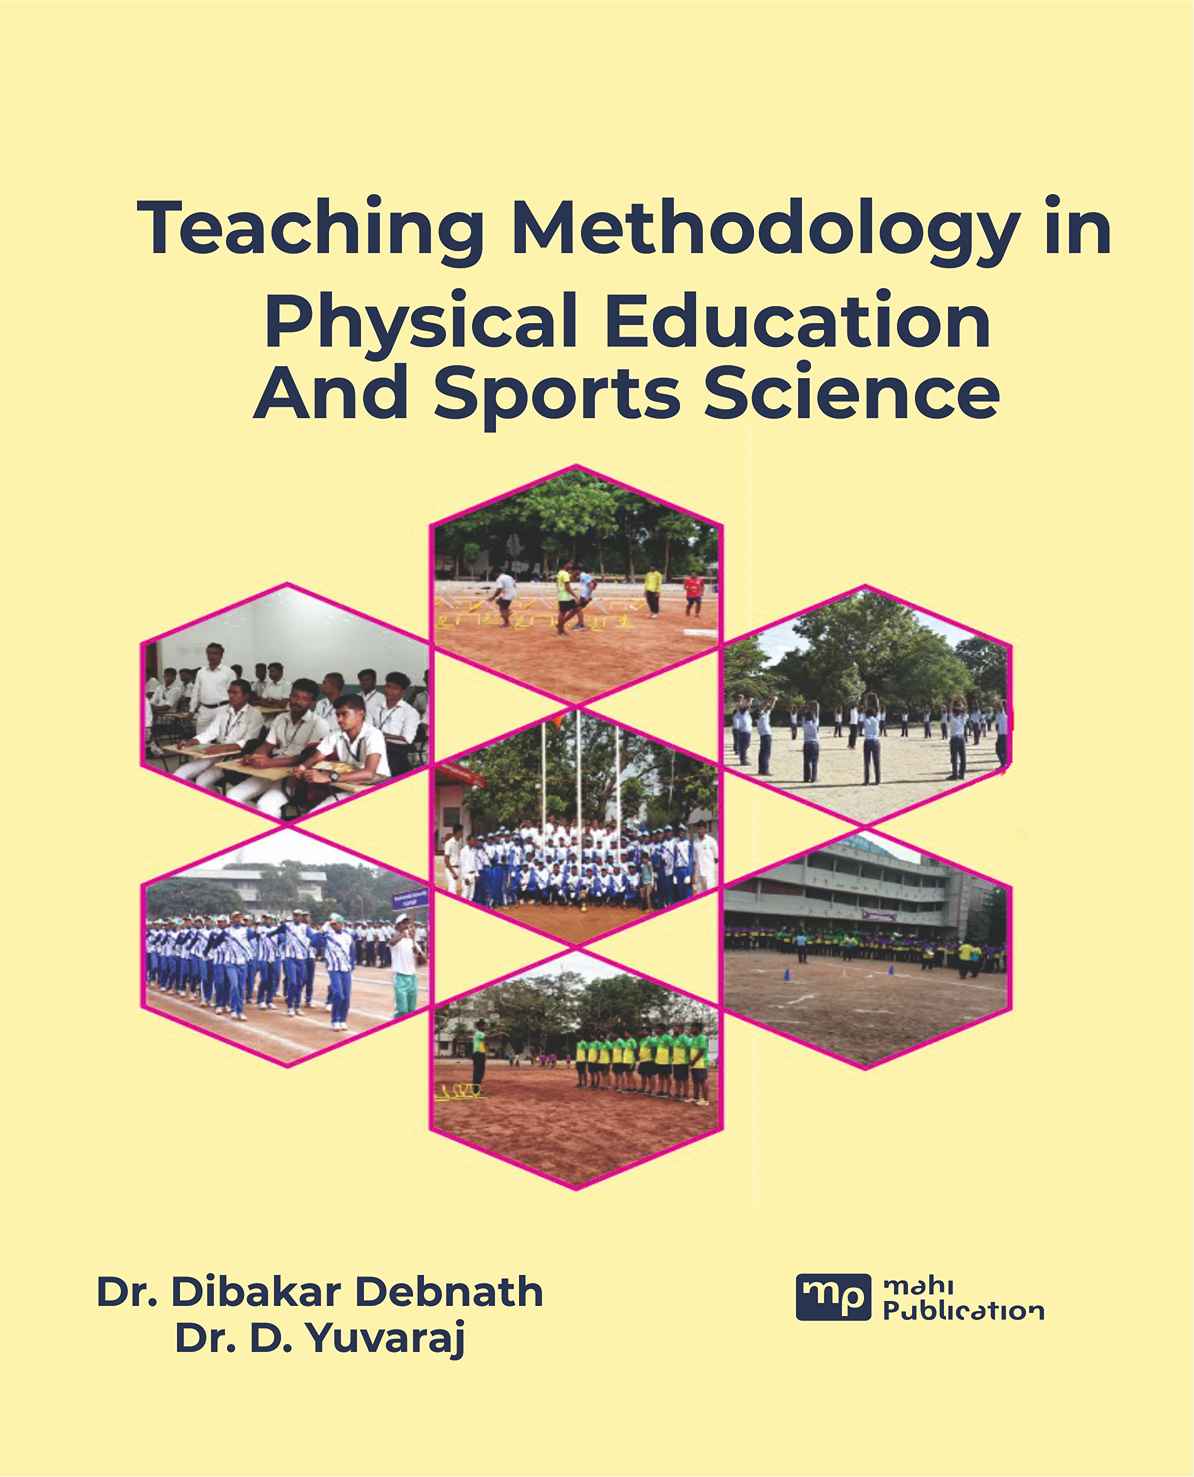 Teaching Methodology in Physical Education and Sports Science